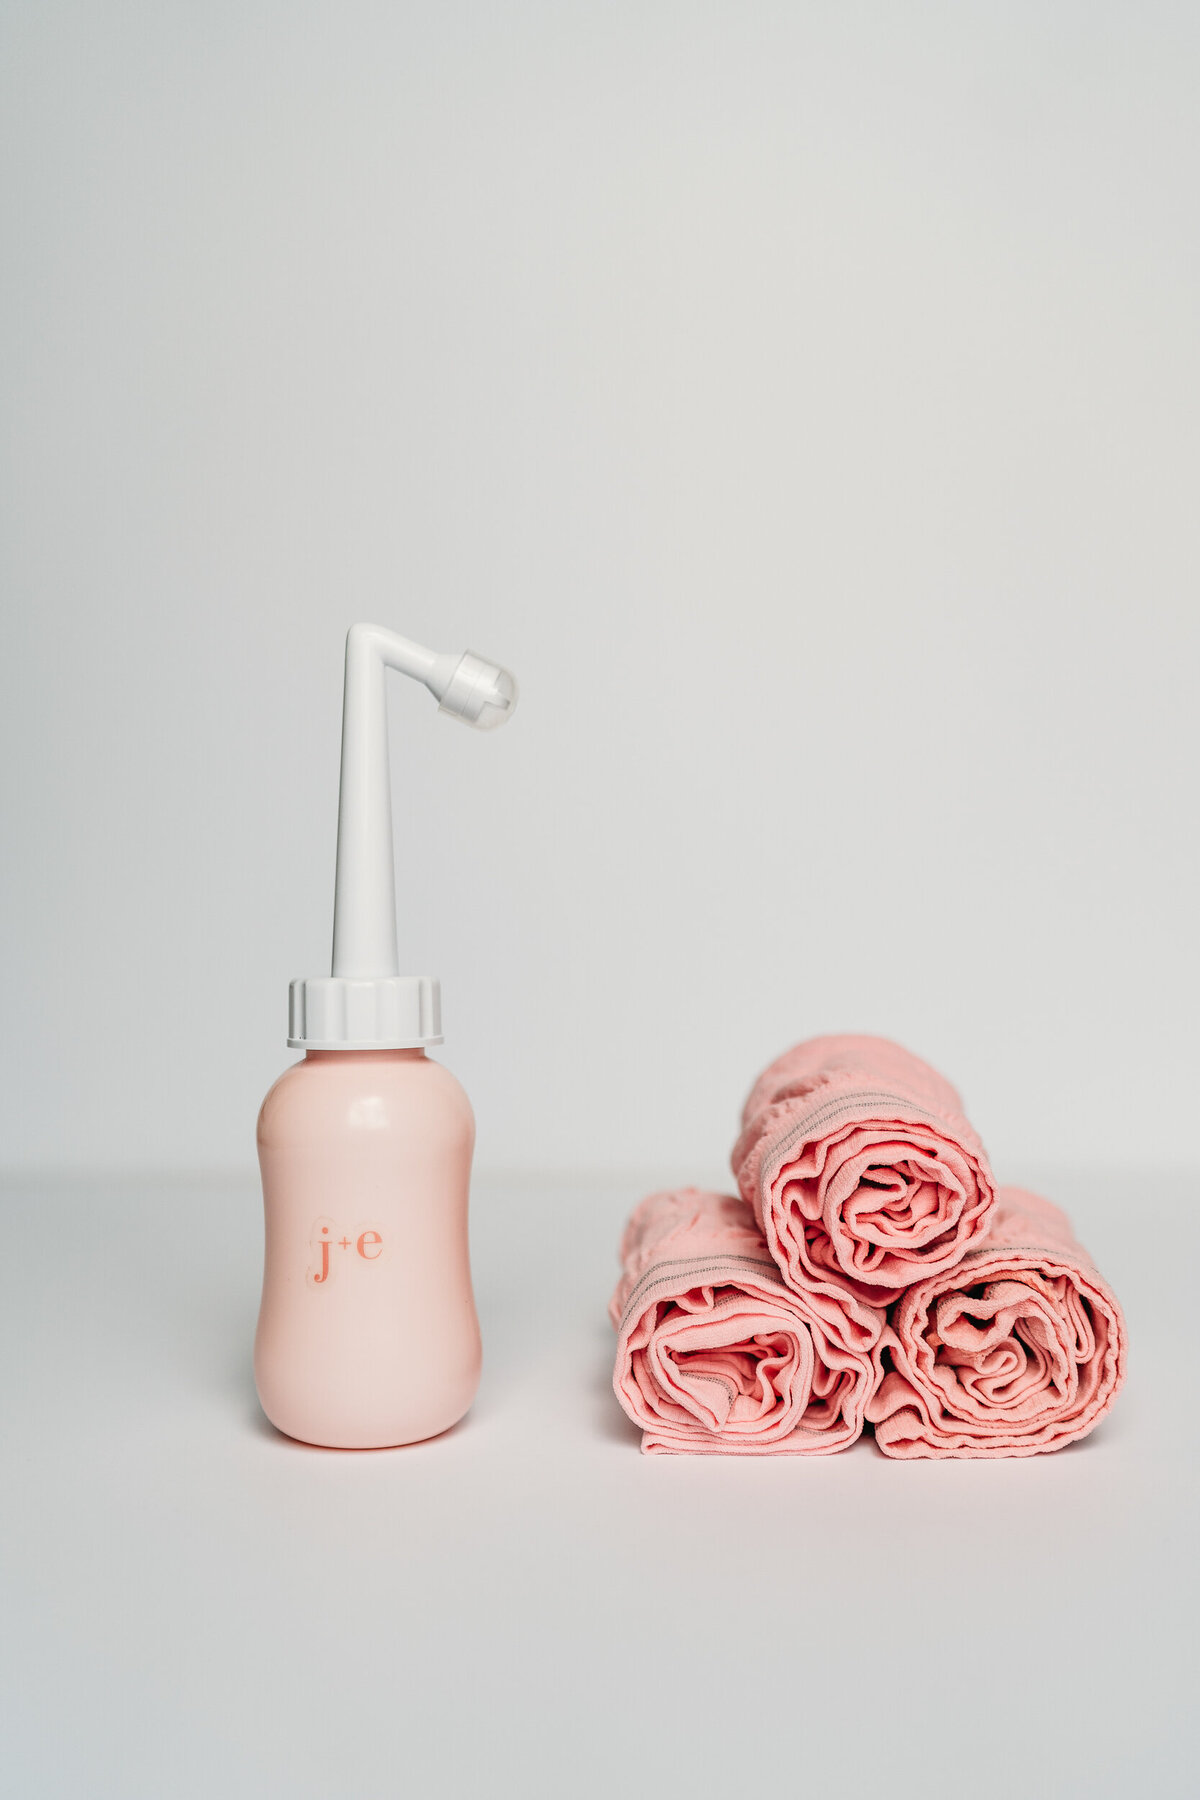 product shot of pink peri bottle and pink underwear